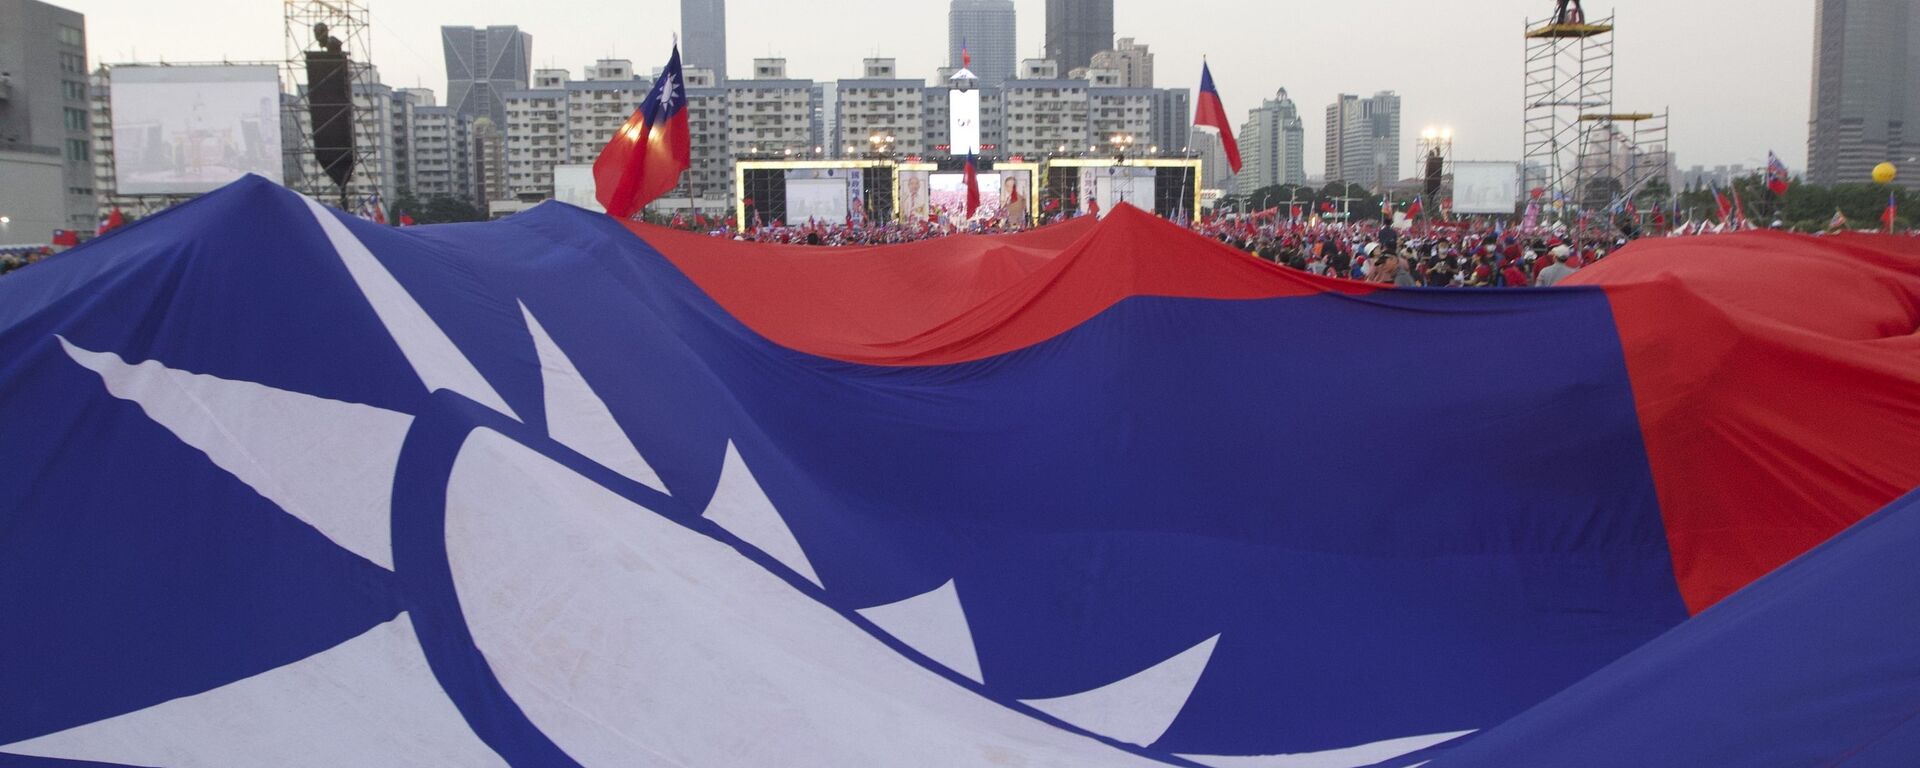 Supporters of Taiwan's 2020 presidential election candidate for the KMT, or Nationalist Party, Han Kuo-yu pass along a giant Taiwanese flag for the start of a campaign rally in southern Taiwan's Kaohsiung city on Friday, Jan 10, 2020 - Sputnik International, 1920, 28.06.2022